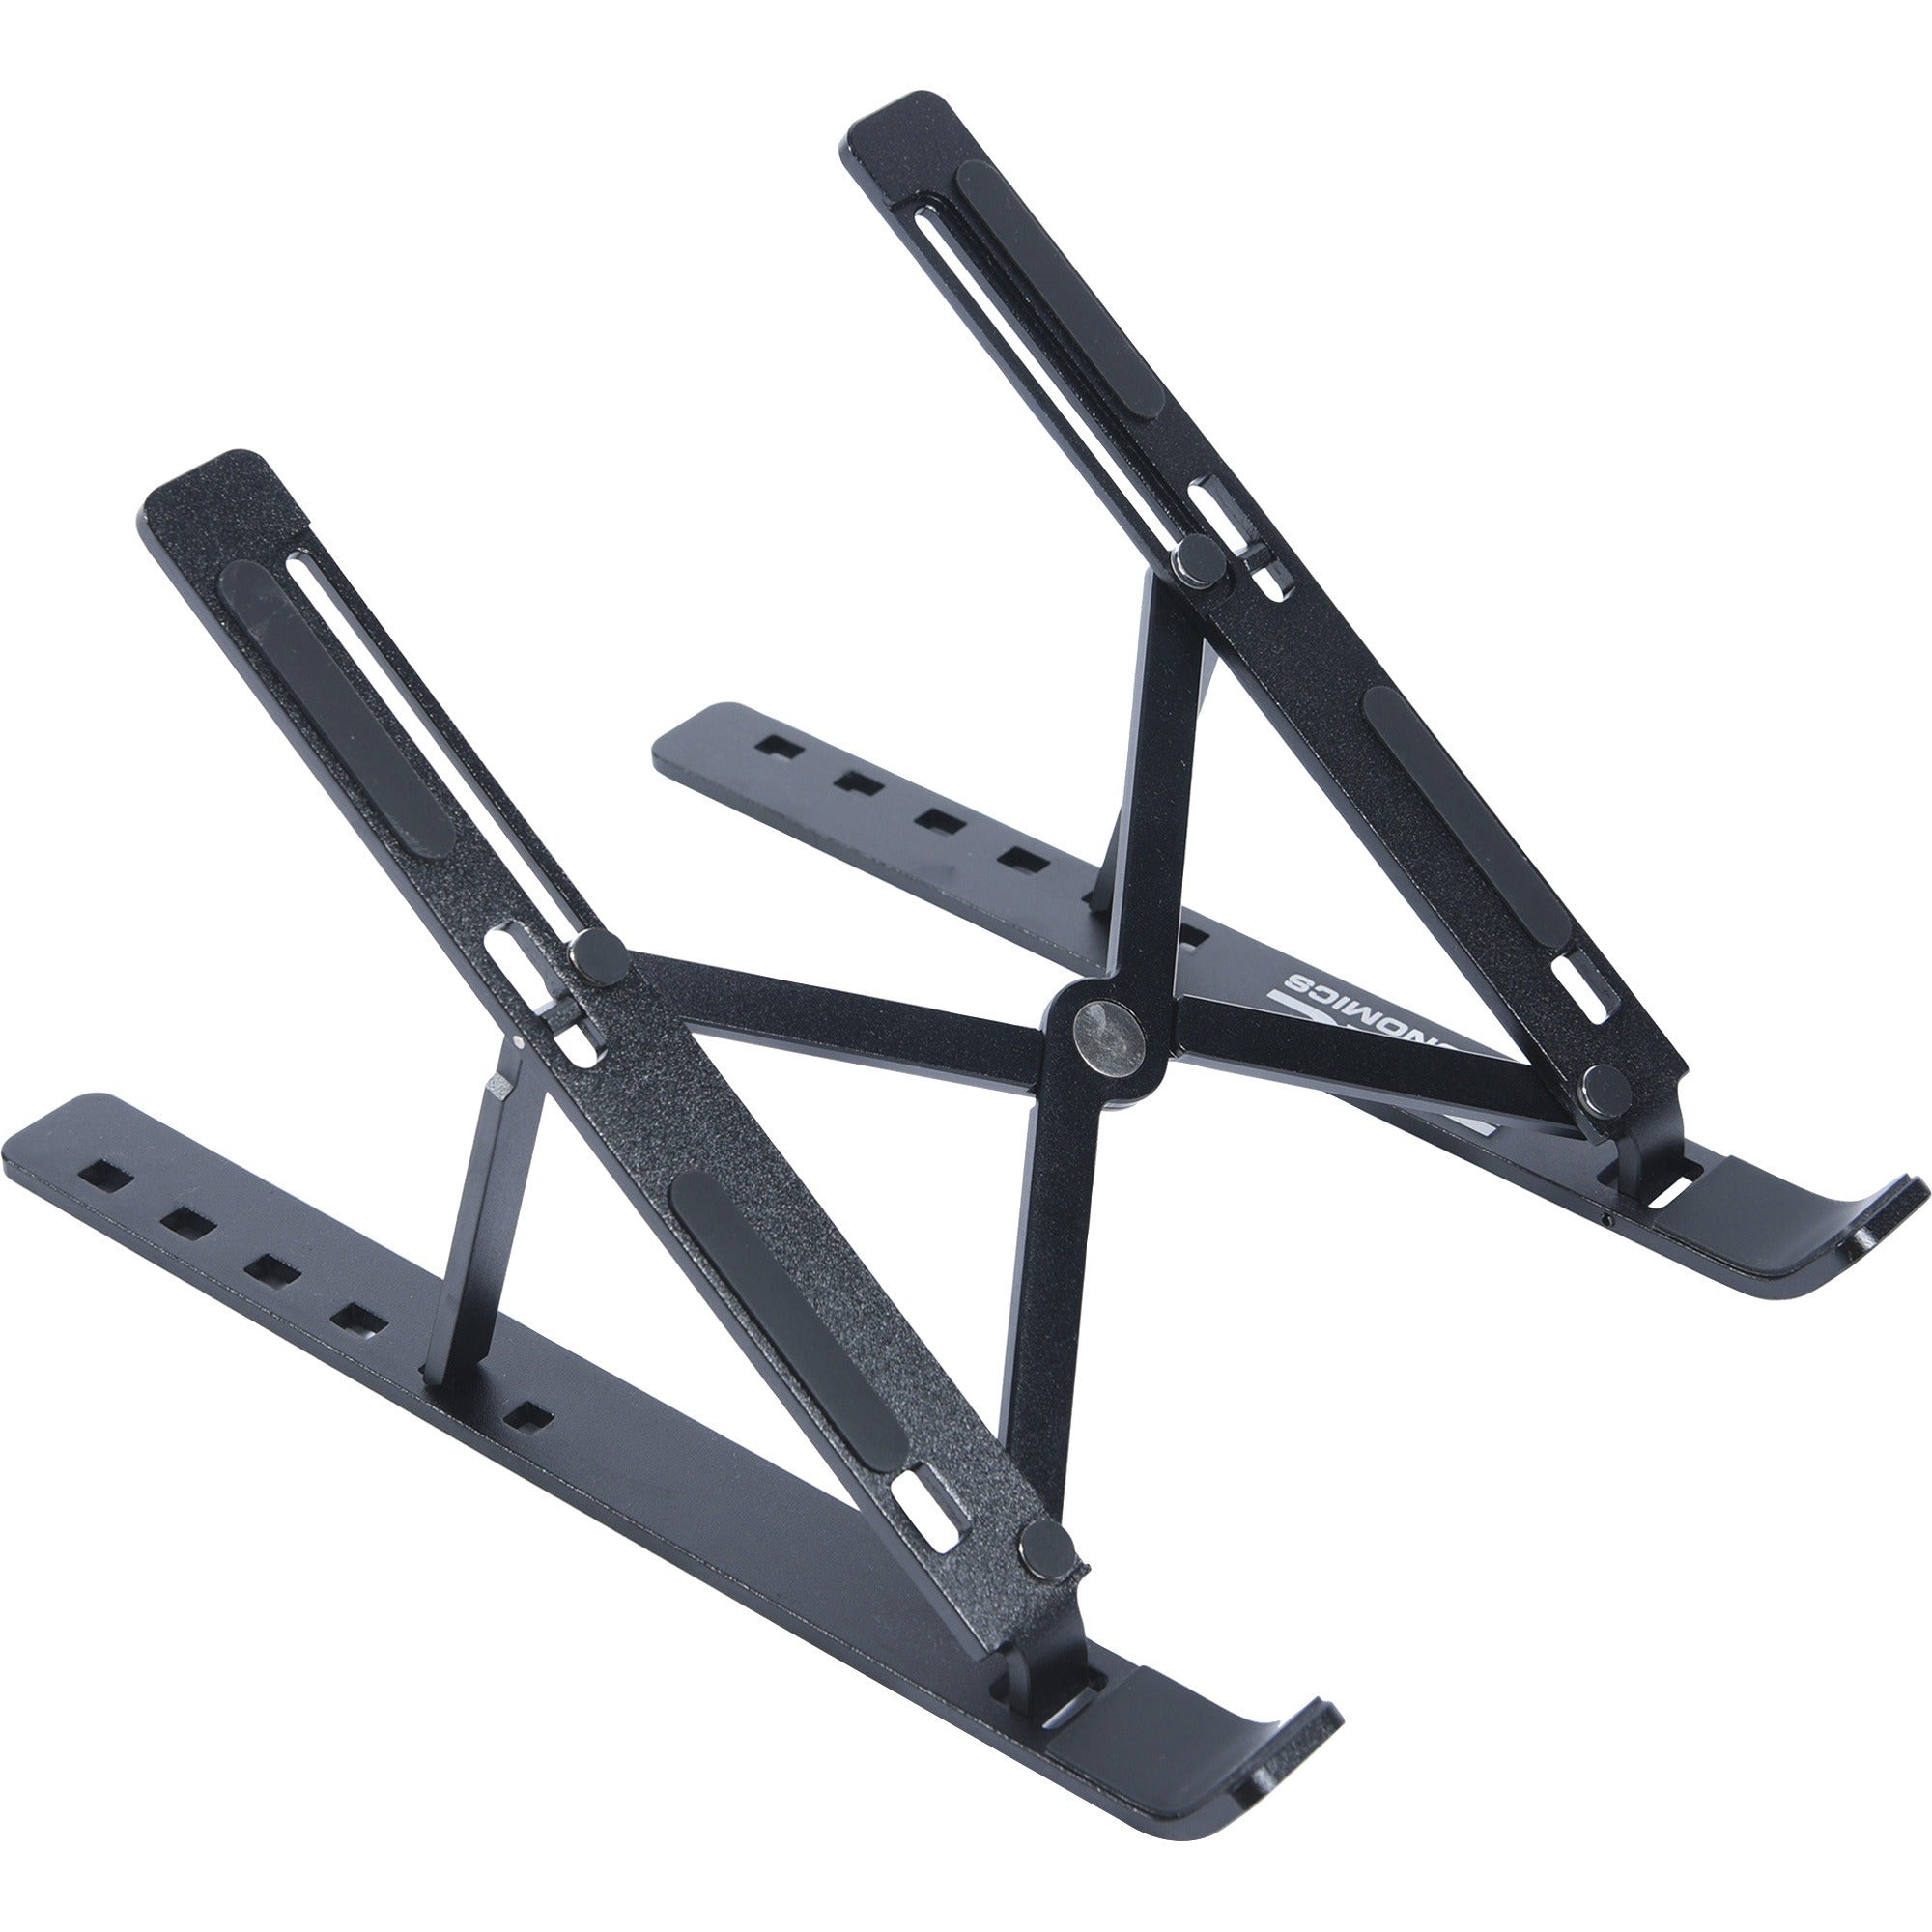 dac-portable-and-adjustable-laptop-tablet-stand-notebook-tablet-cell-phone-support-aluminum-alloy-black_dta21684 - 1